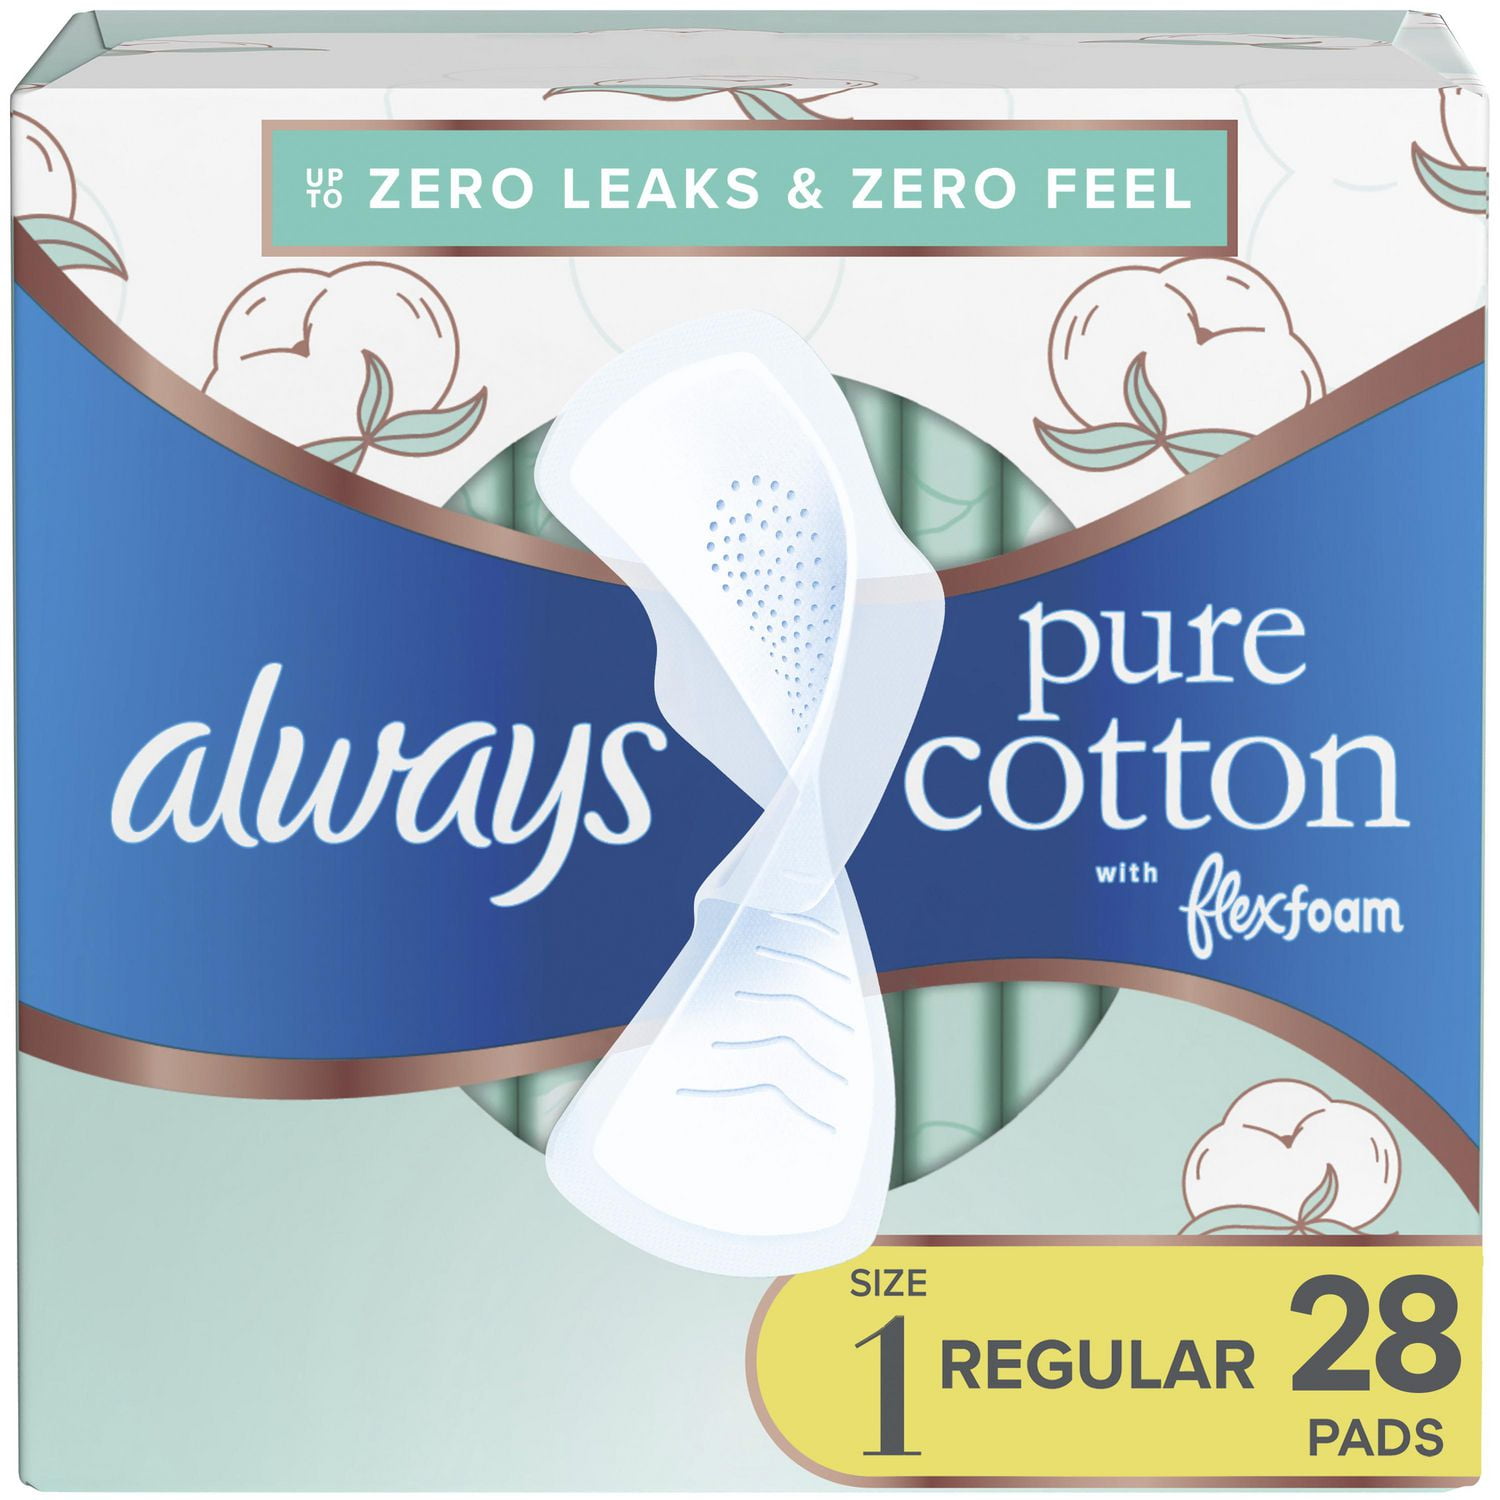 Always Pure Cotton with FlexFoam Pads Regular Absorbency Size 1